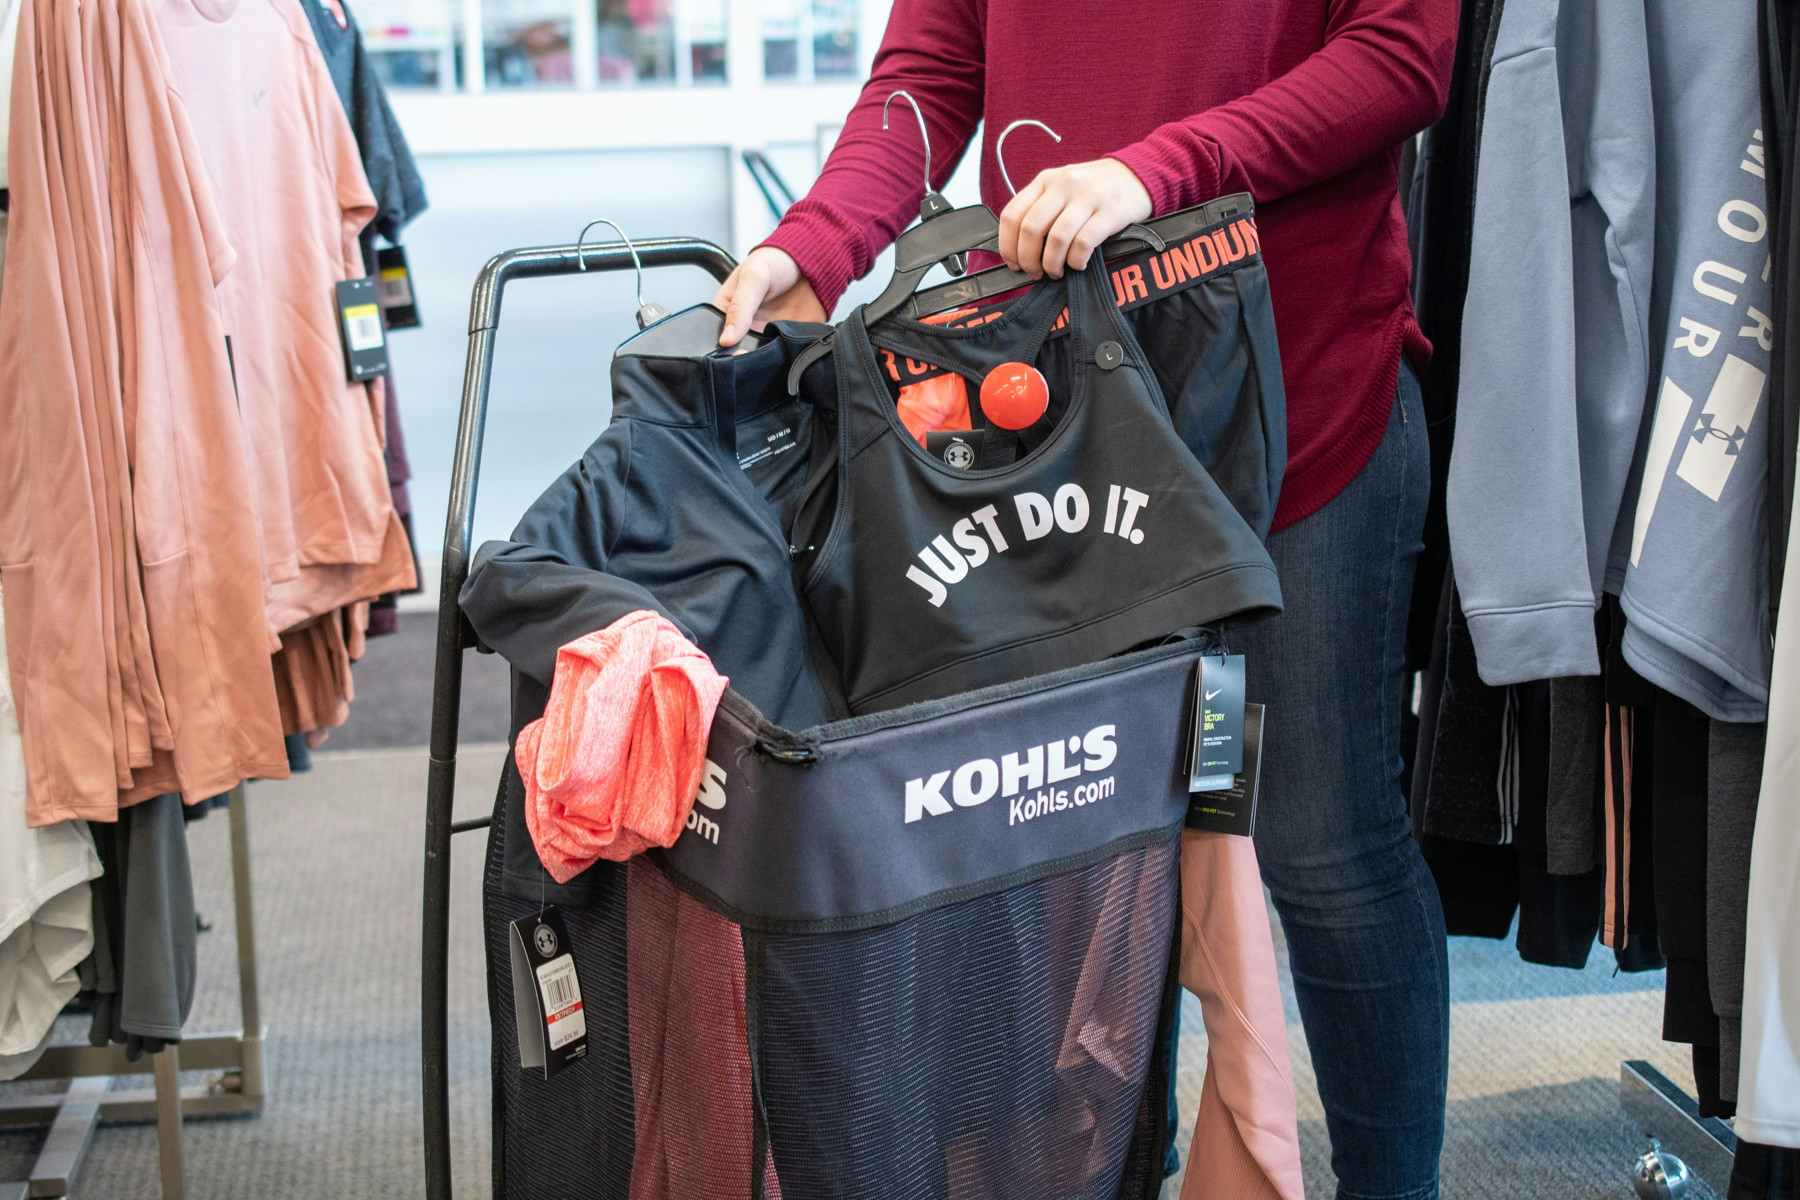 A person putting Nike and Under Armour activewear into a Kohl's shopping cart.